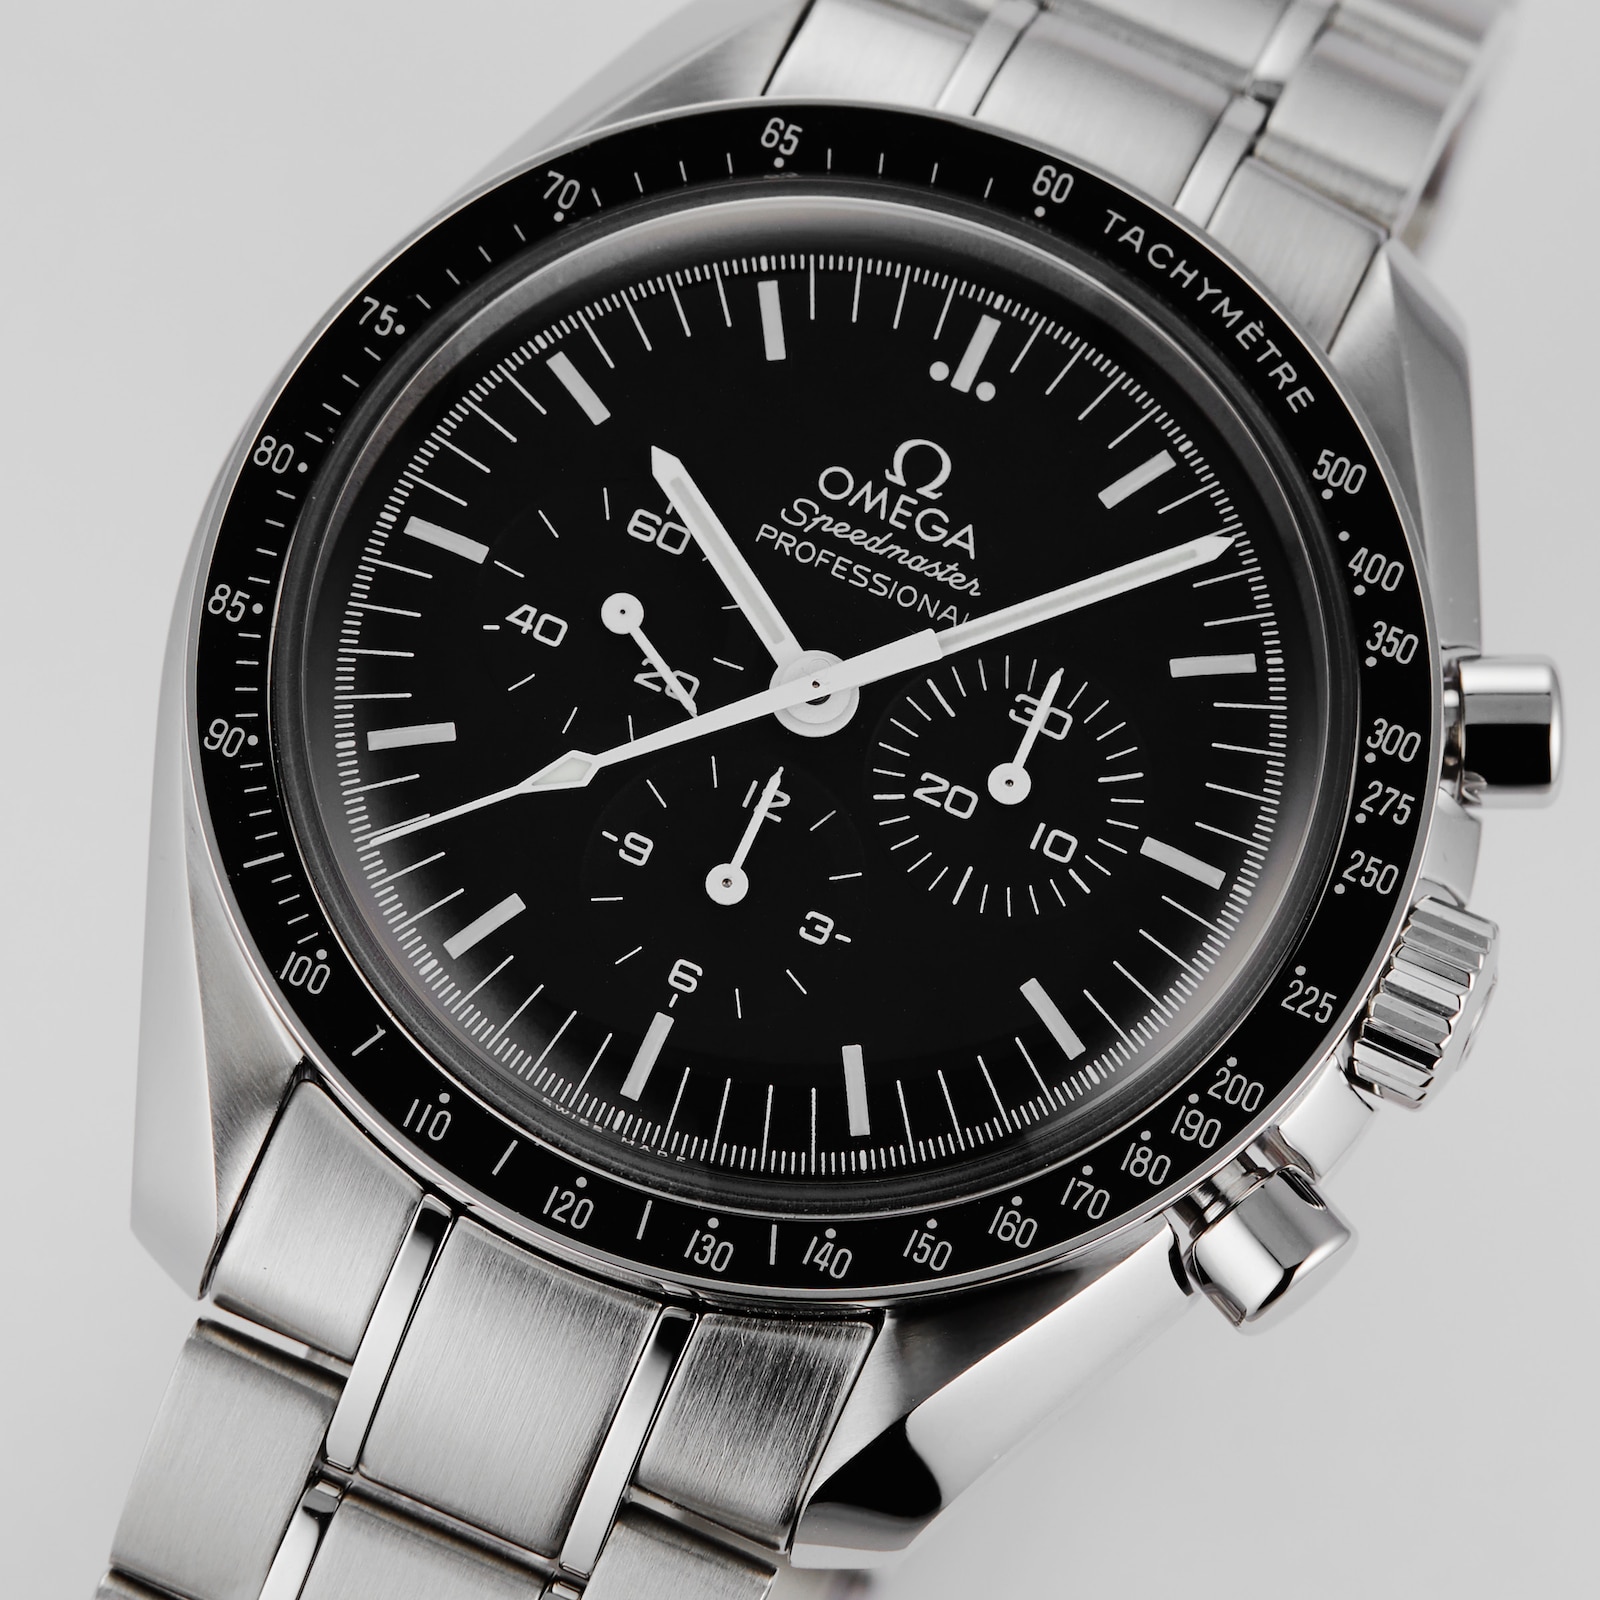 Omega Speedmaster Professional Moonwatch First Watch On The Moon ...